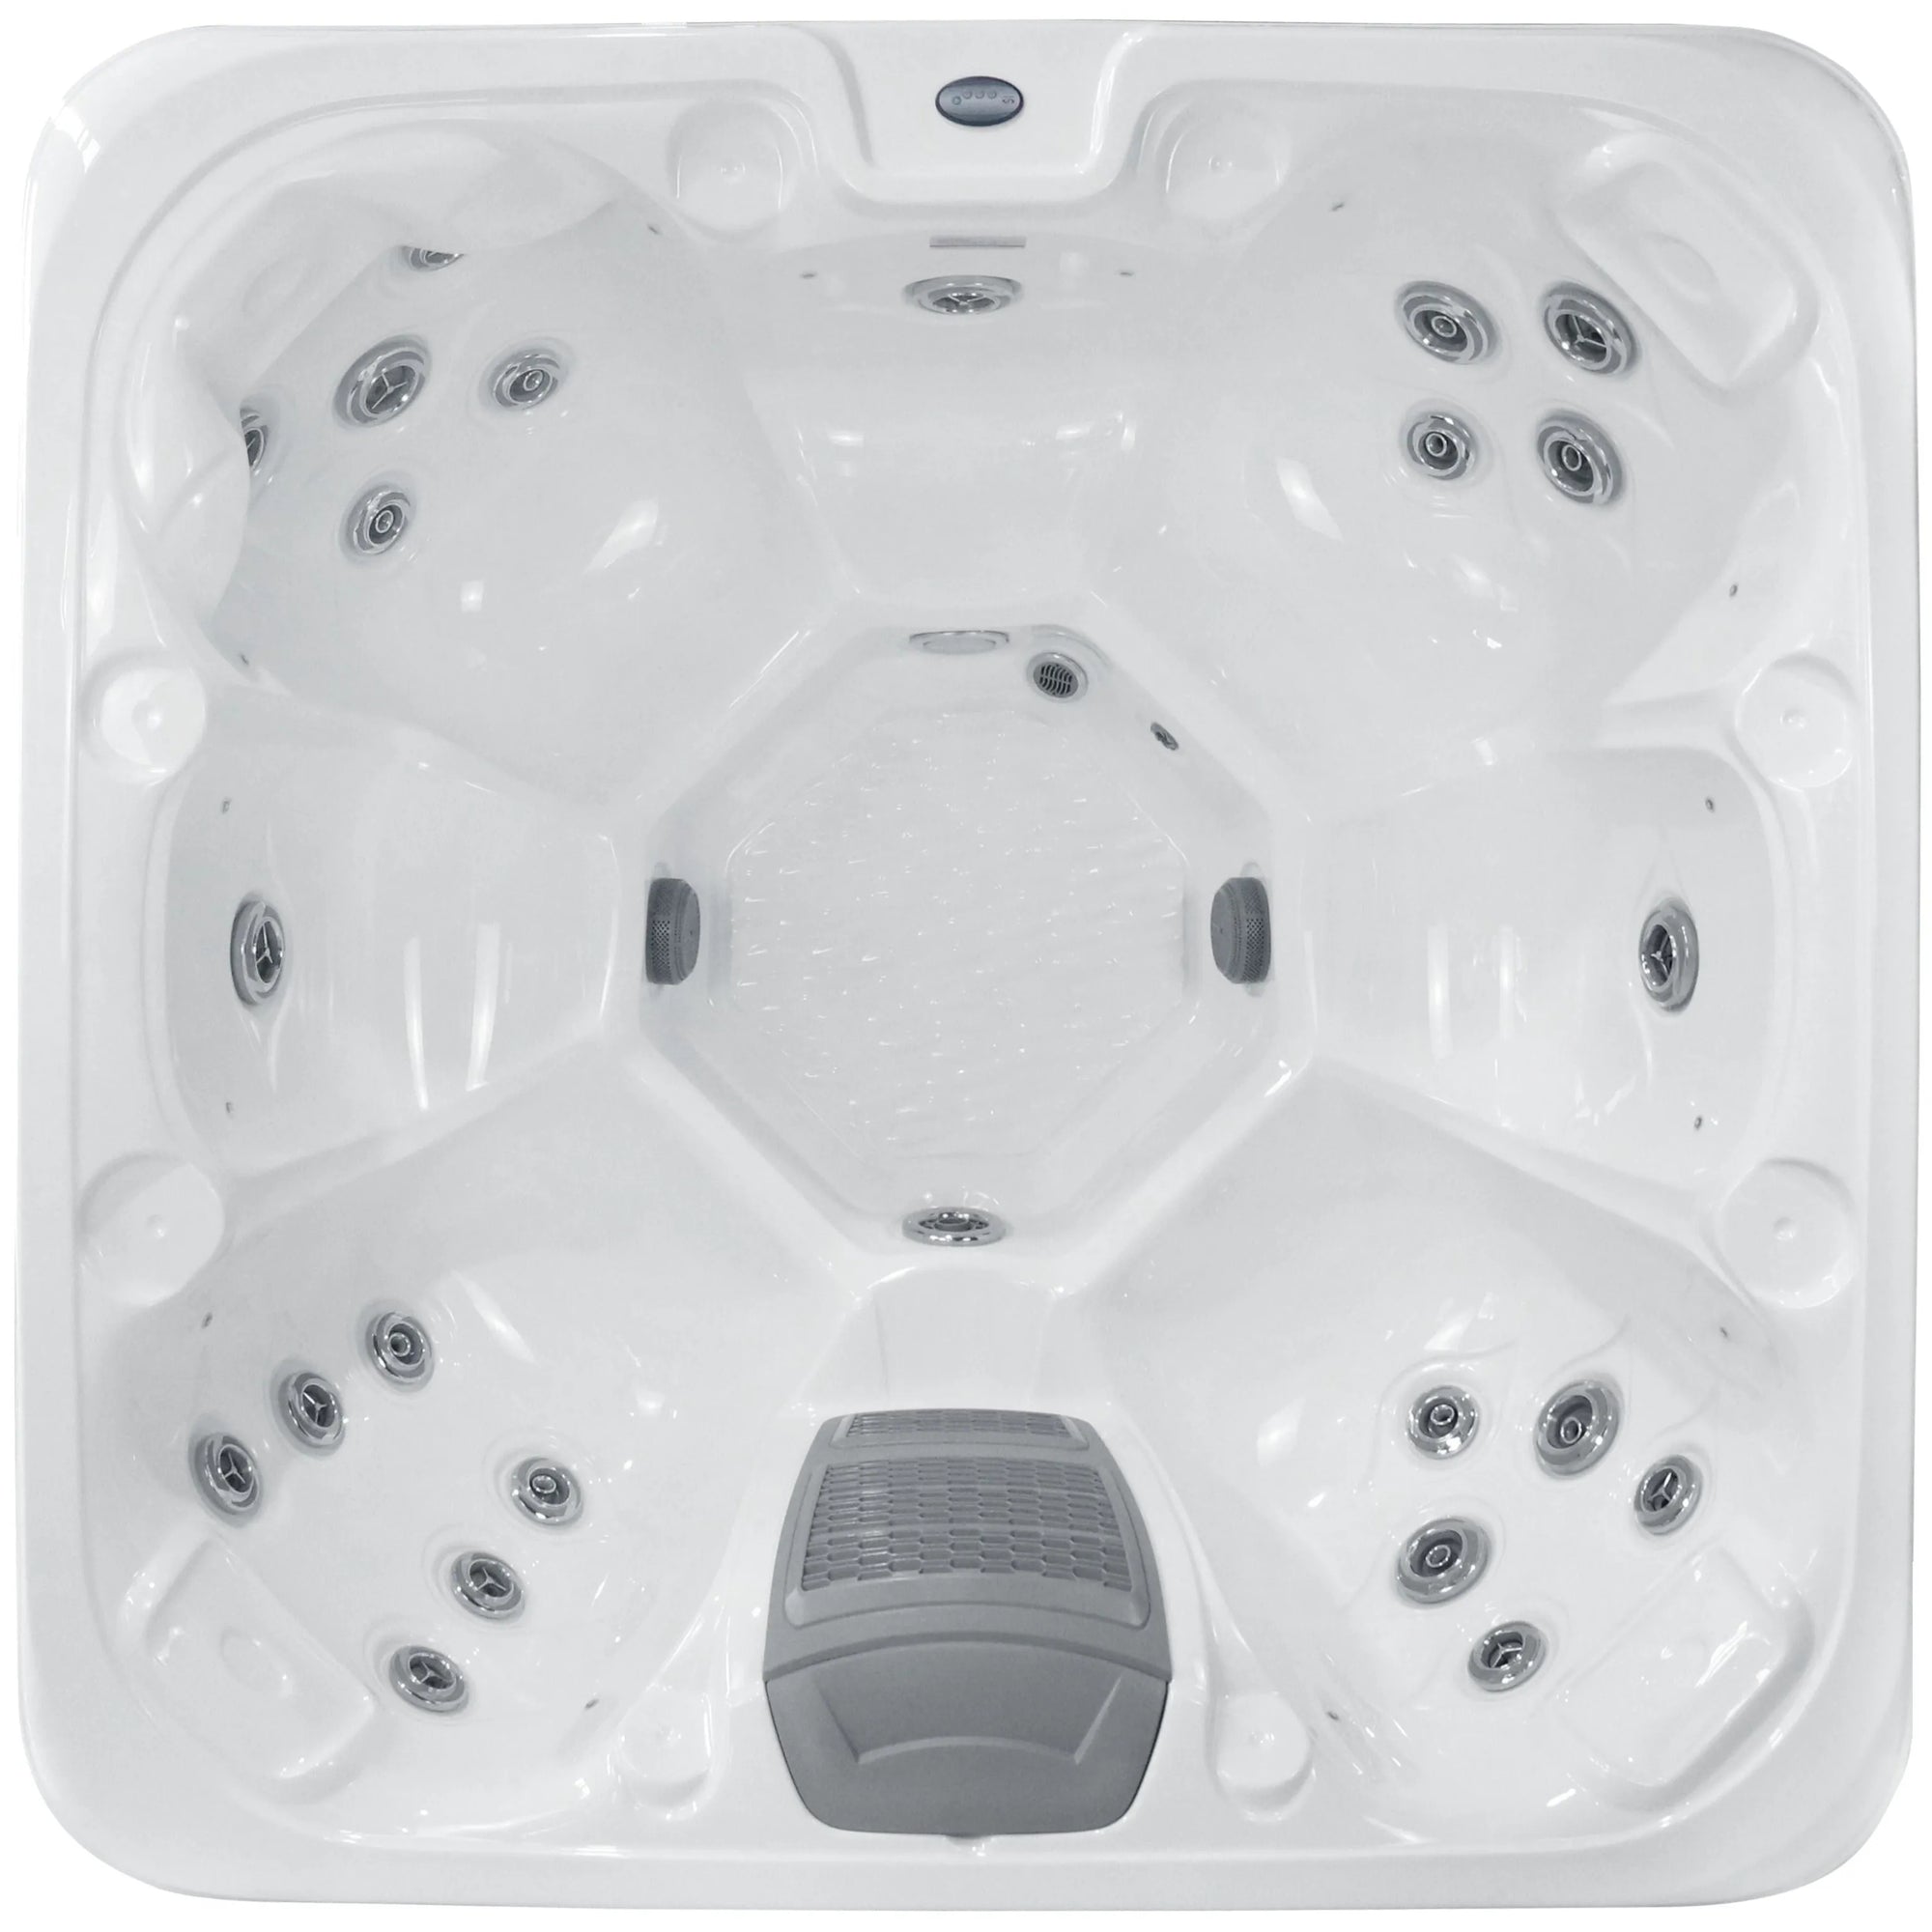 A top-down view of a square white Hot Tub Liverpool Vacation Social Holiday Let Hot Tub with multiple water jets and seating areas. Each corner features ergonomic seating with built-in jets. There is a control panel visible on one side. The interior surface is smooth and glossy, making it perfect for vacation social gatherings in holiday parks.